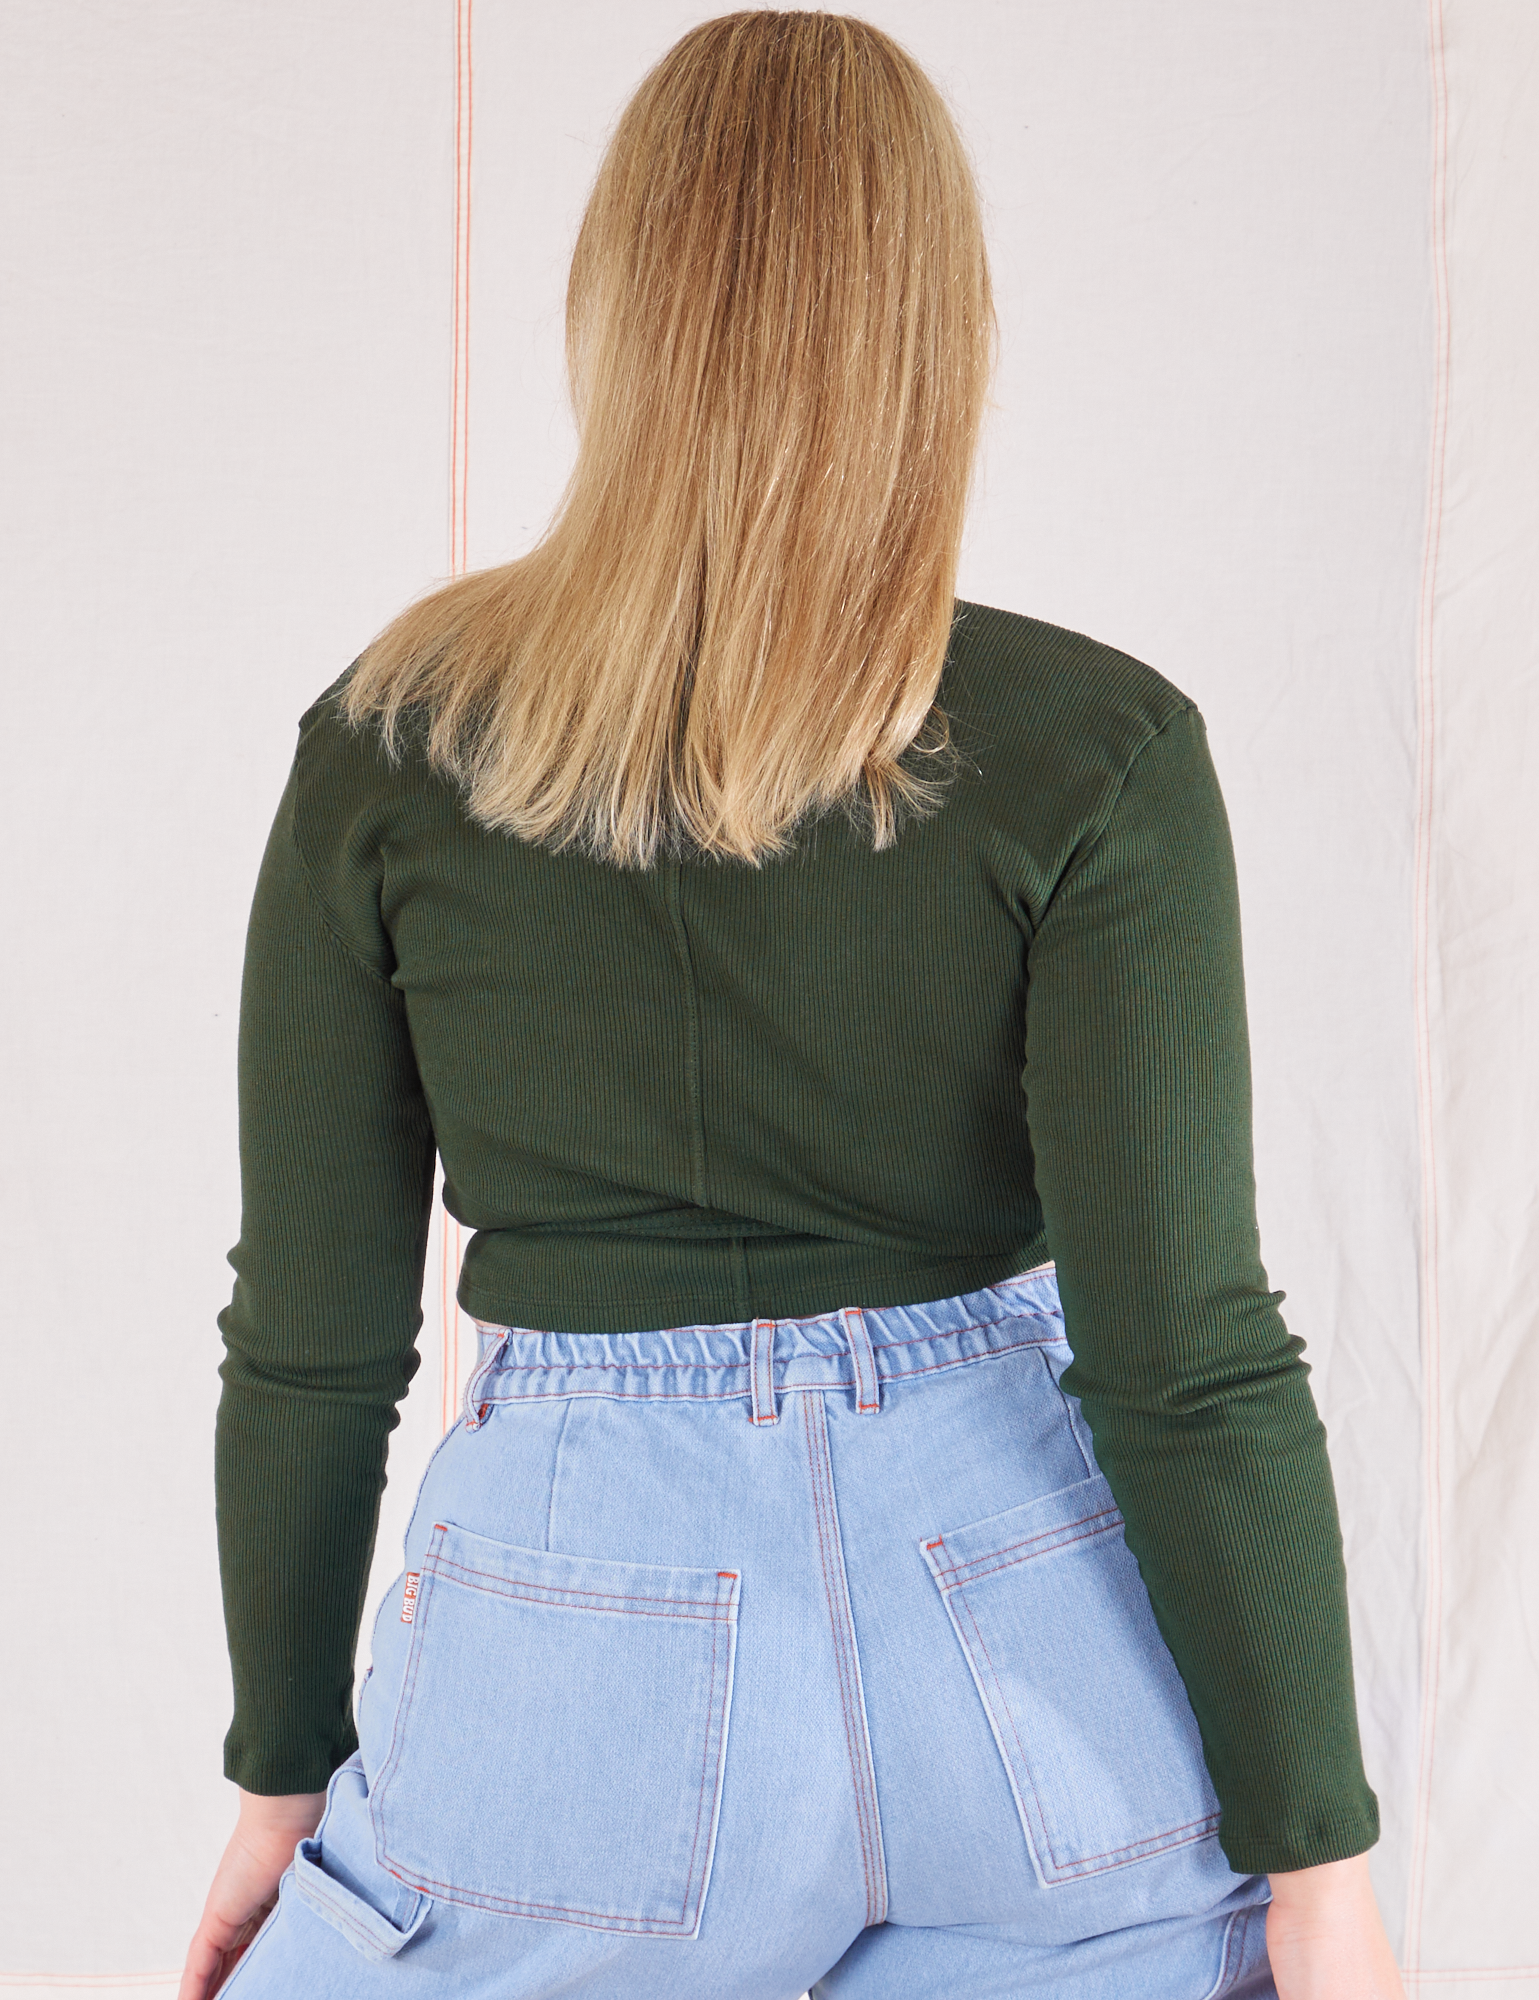 Wrap Top in Swamp Green back view on Lish